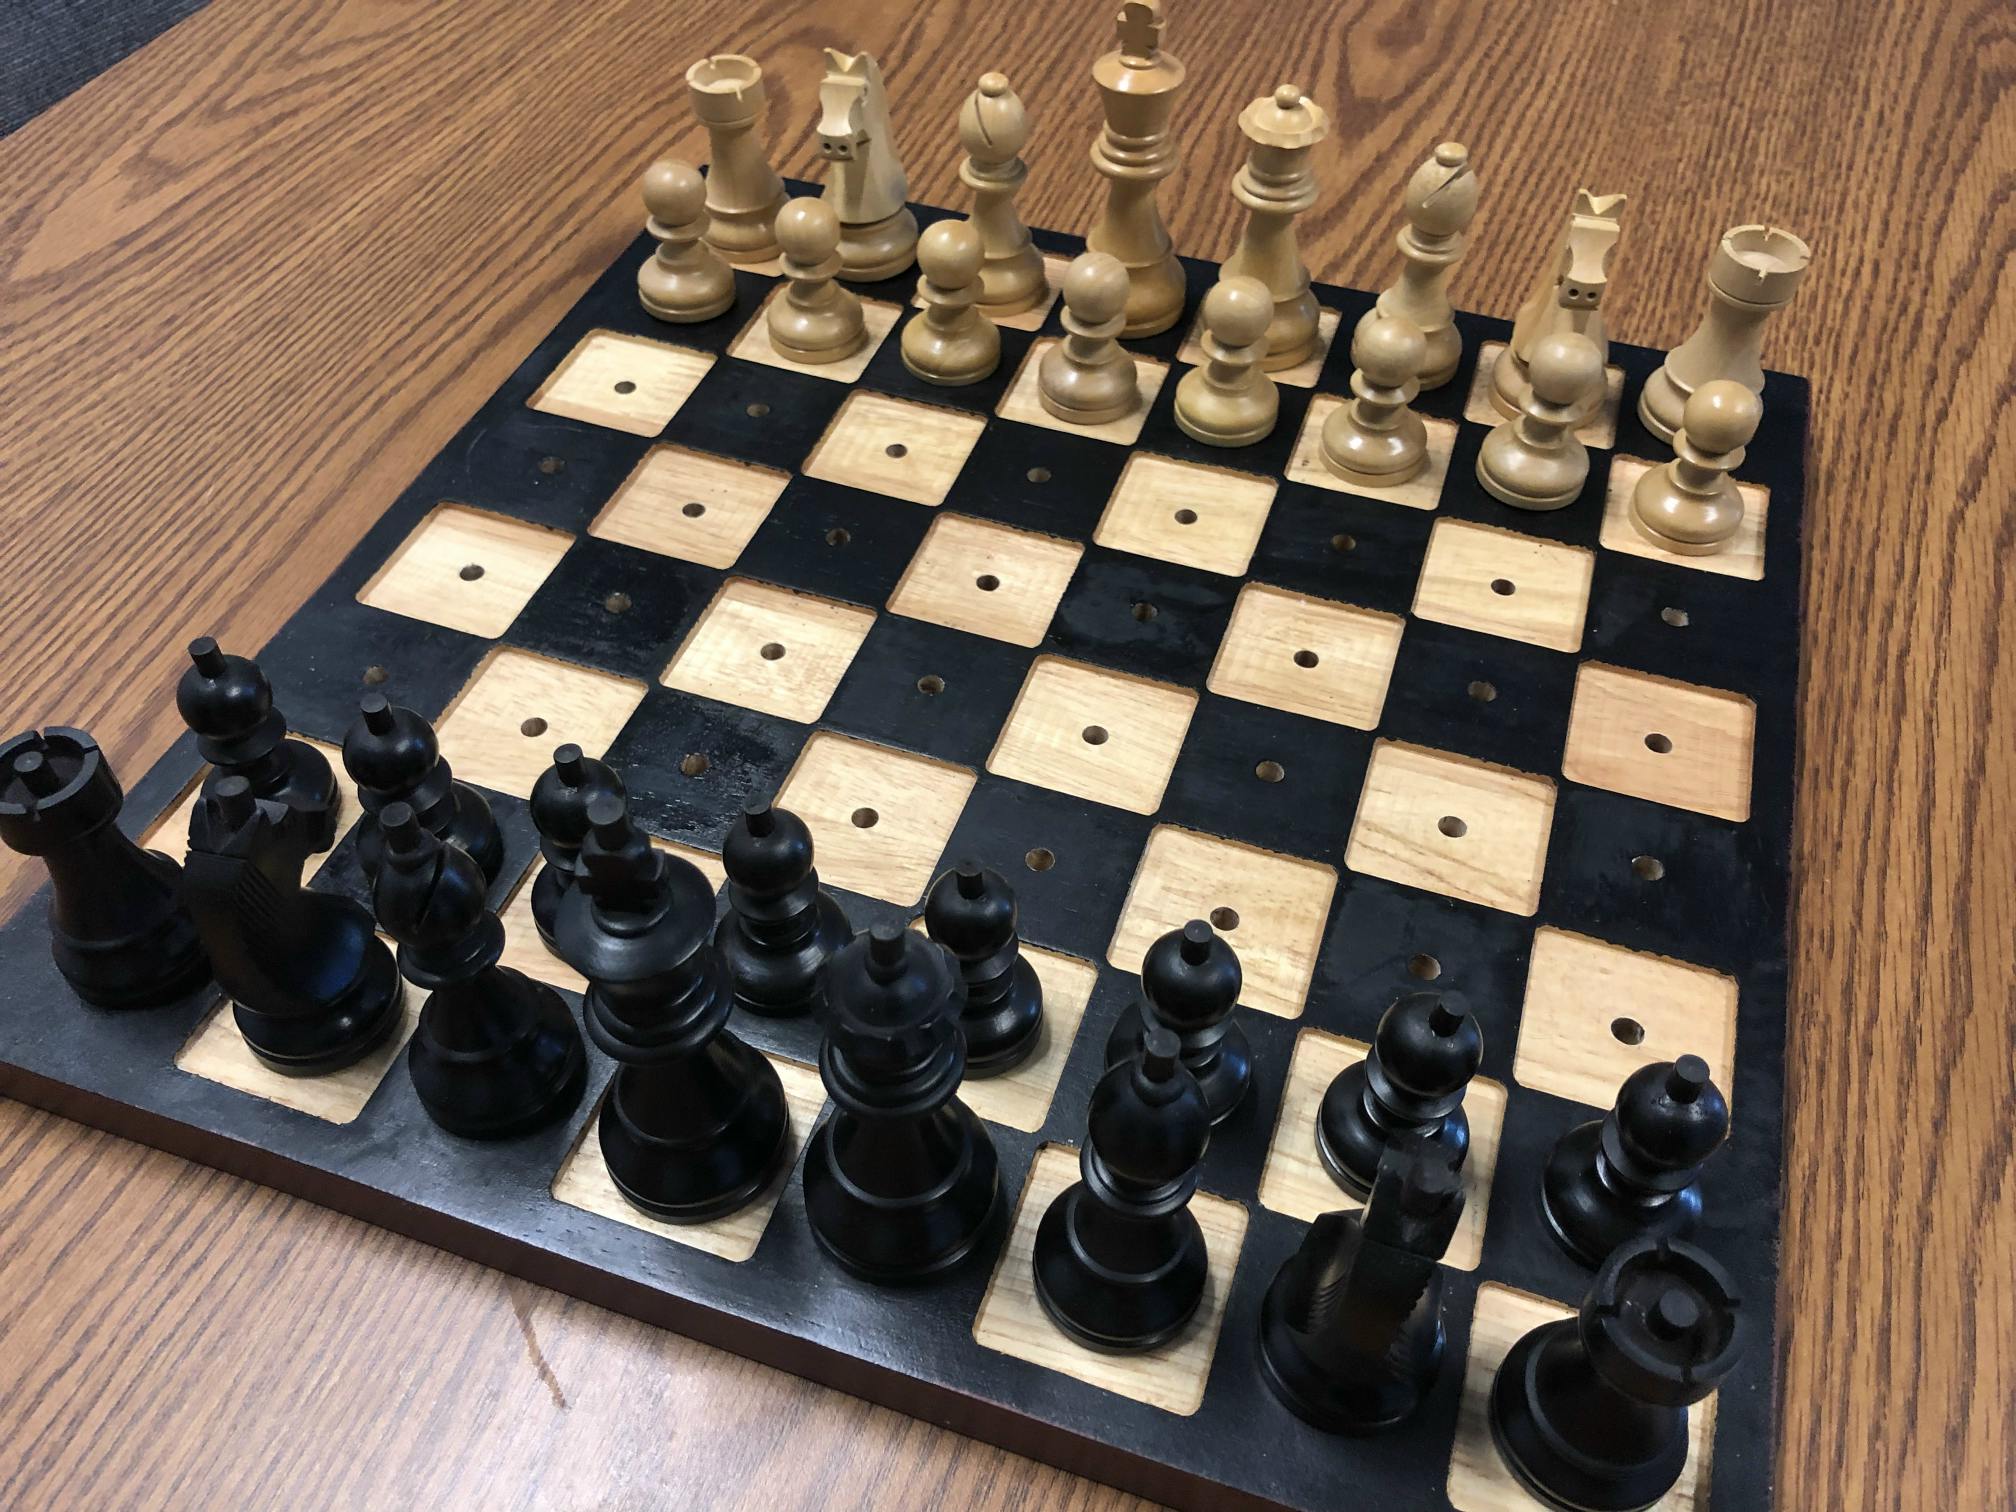 Easy Chess Puzzle # 0076